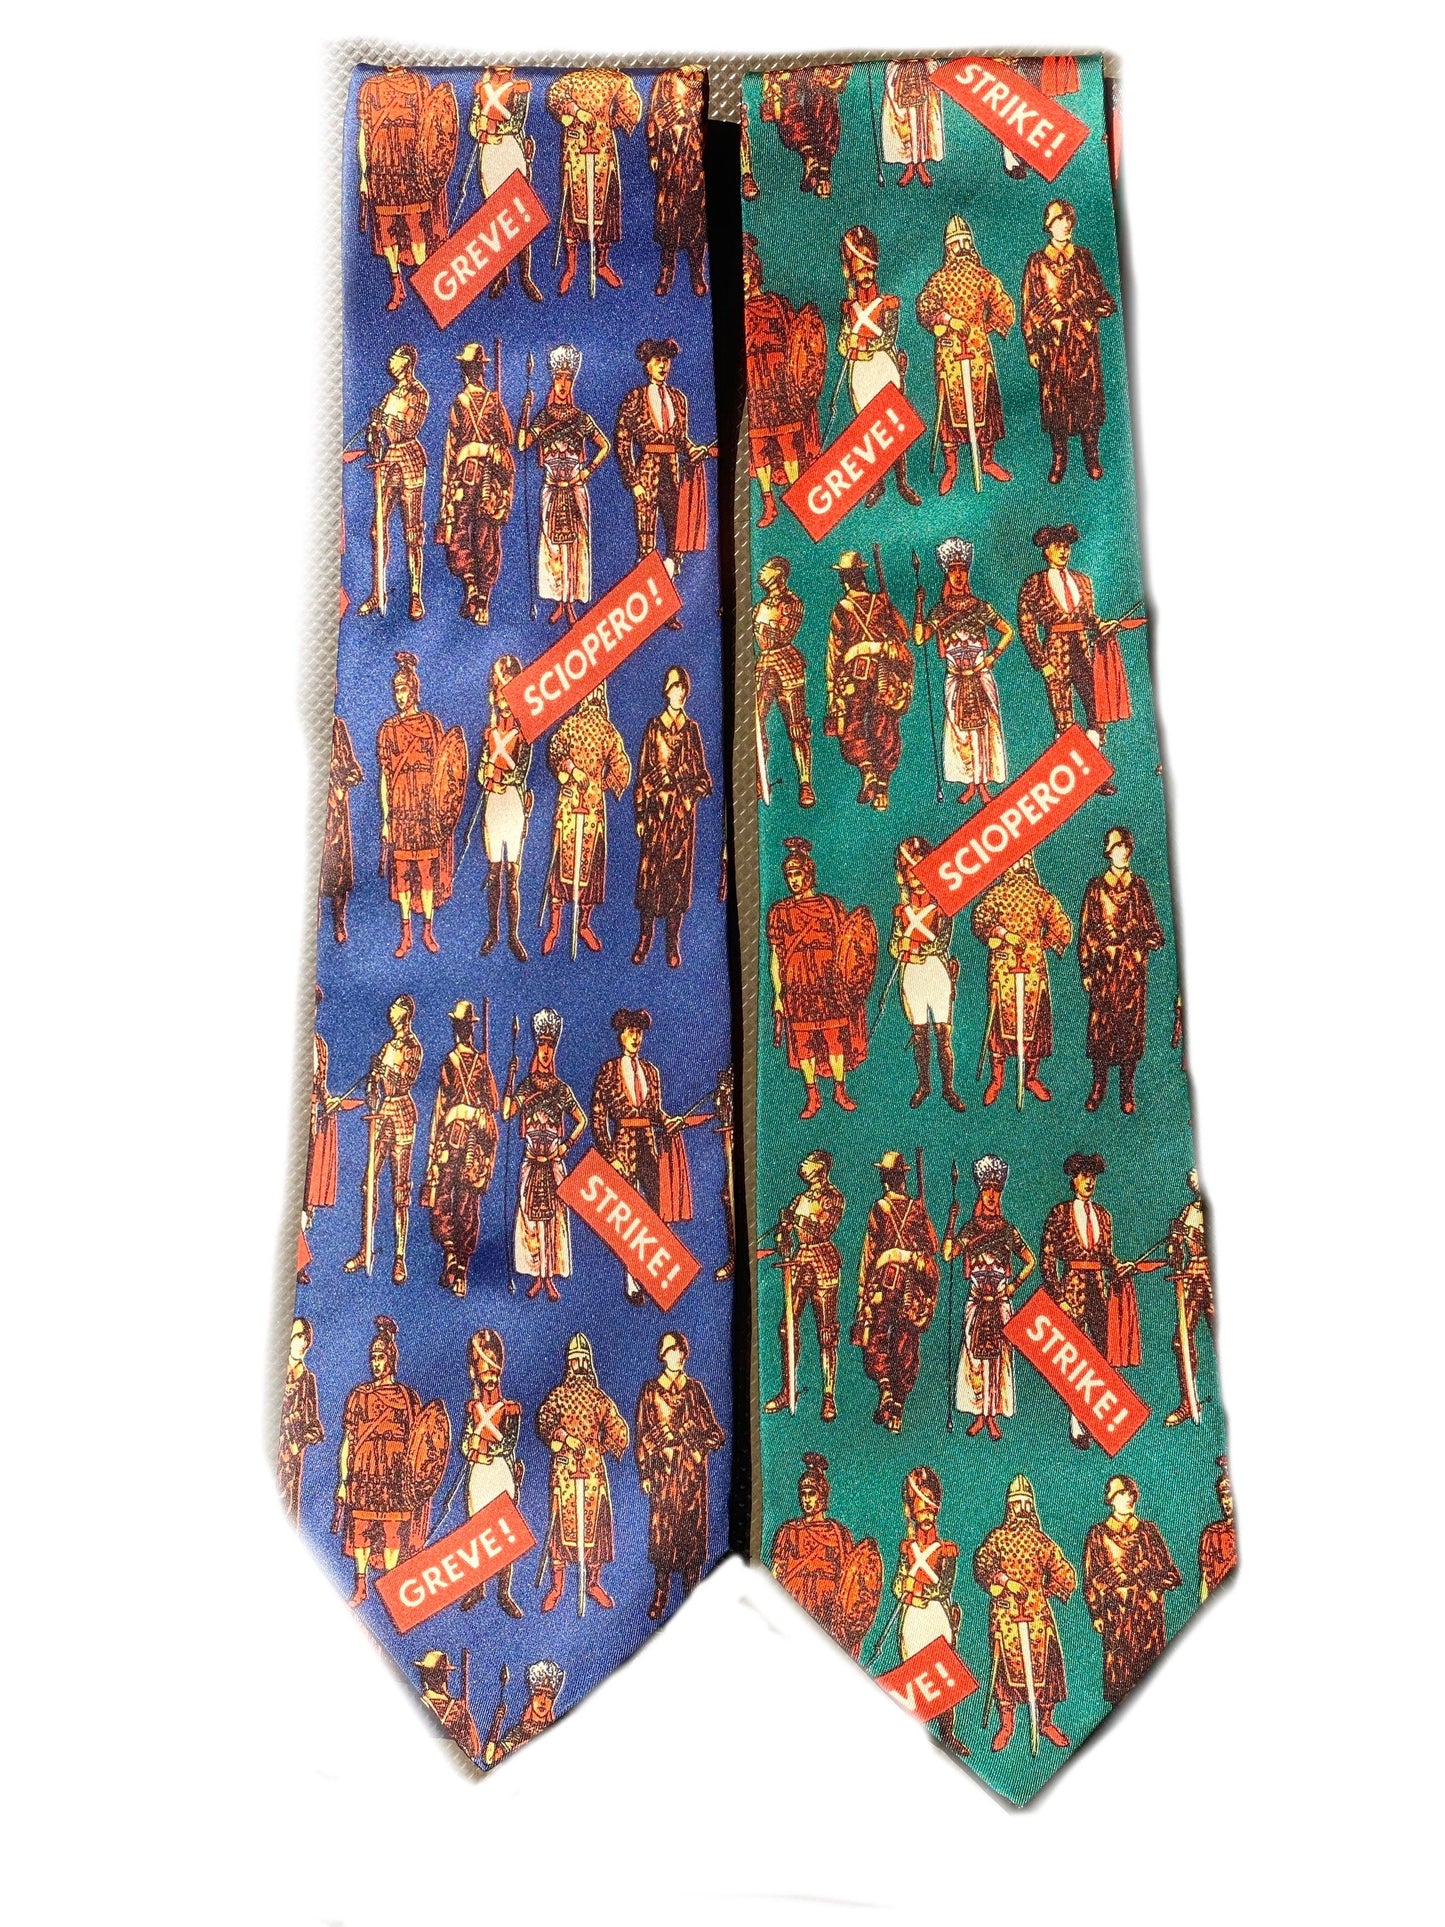 Duke of York unusual strike / greve / sciopero communist themed ties with /peculiar & military costumes allover, blue or green 80s NOS